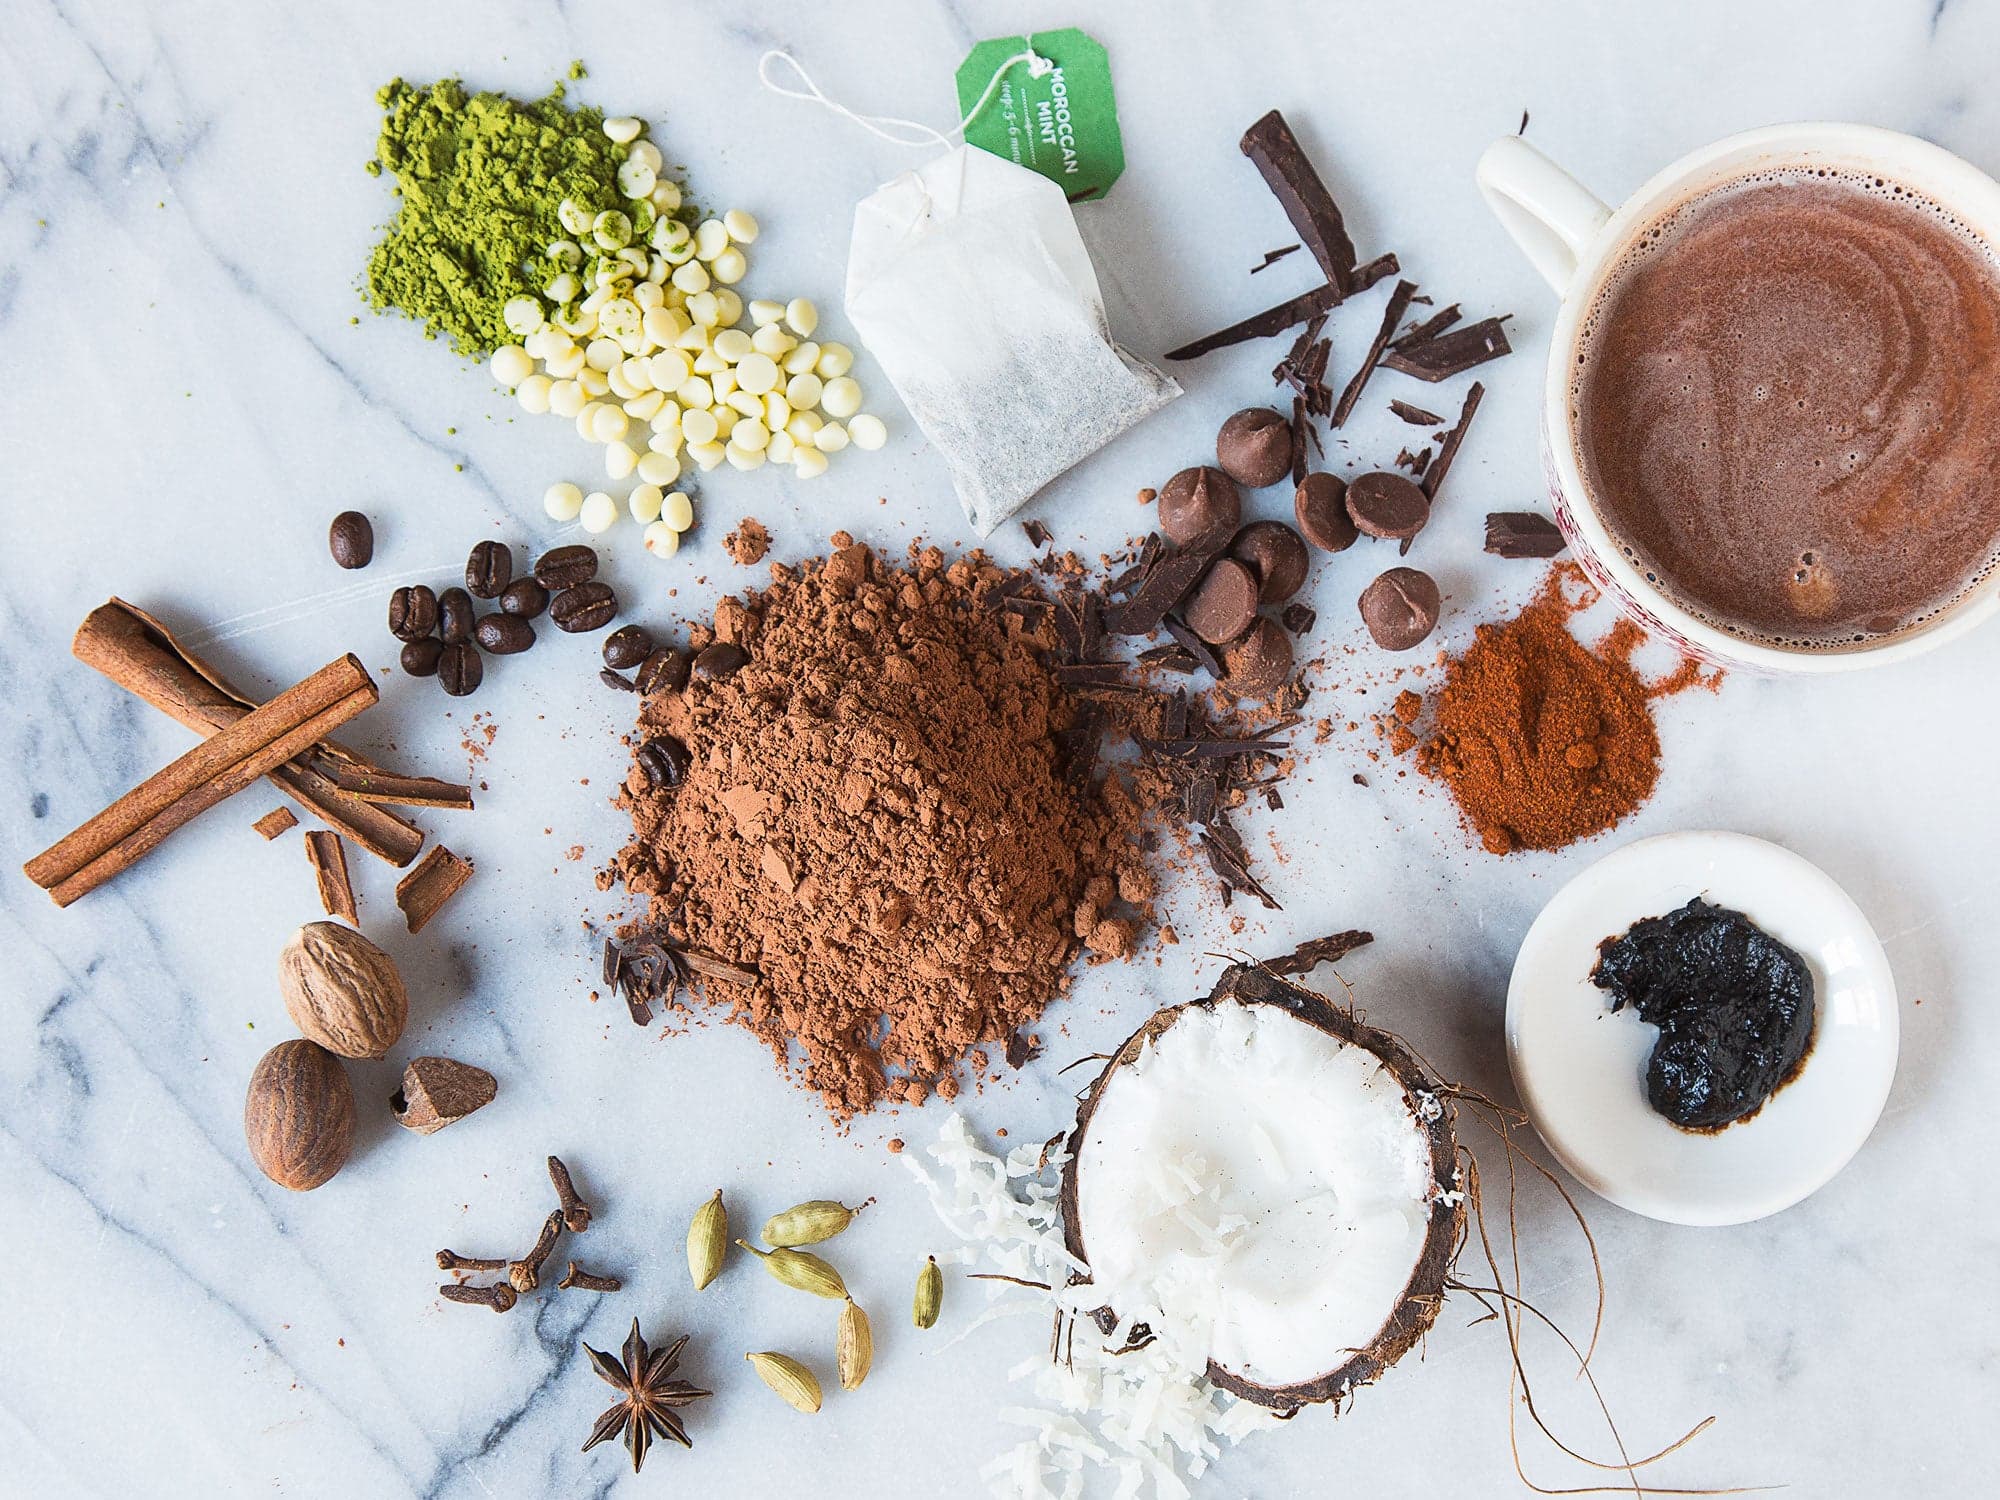 Hot Chocolate ingredients